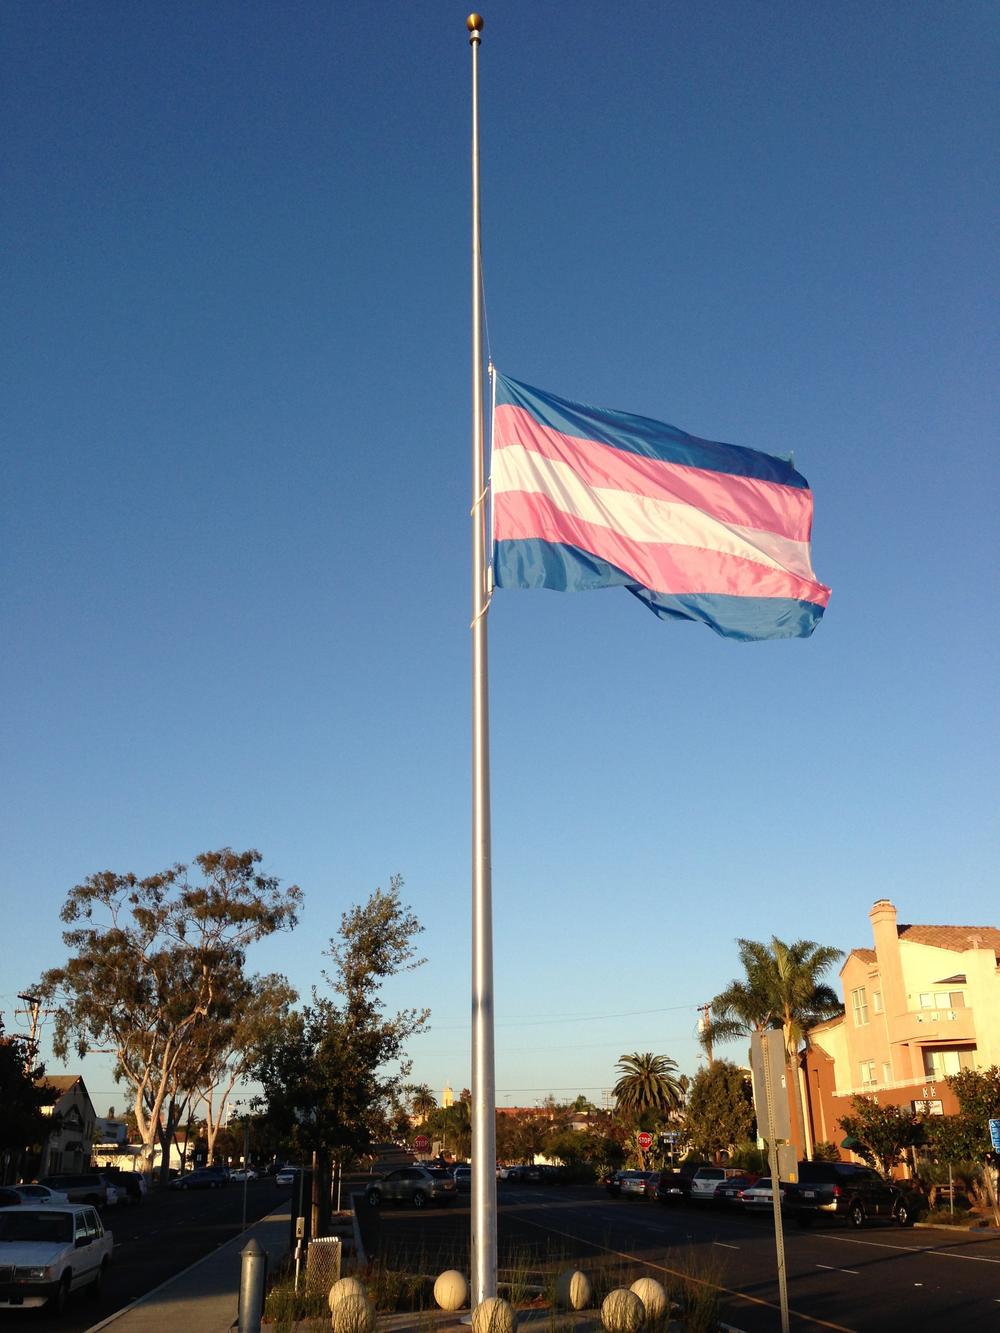 The Transgender Pride Flag was created by American trans woman Monica Helms in 1999.